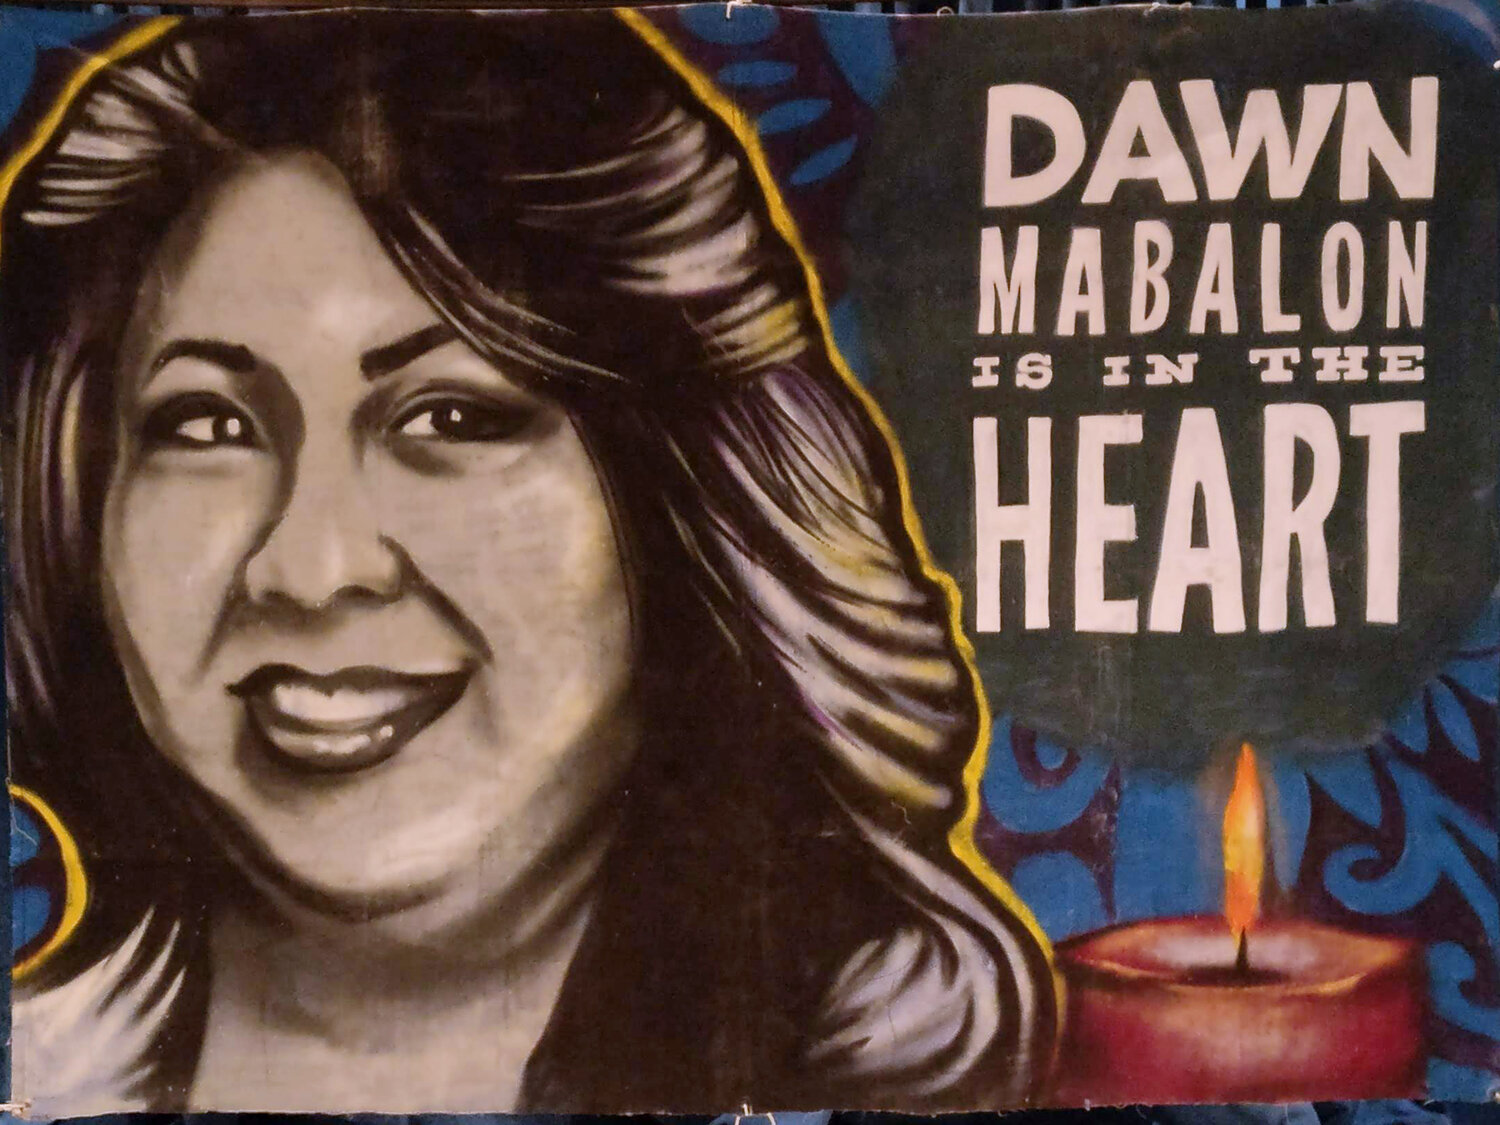 008 - Dawn Mabalon Is In The Heart